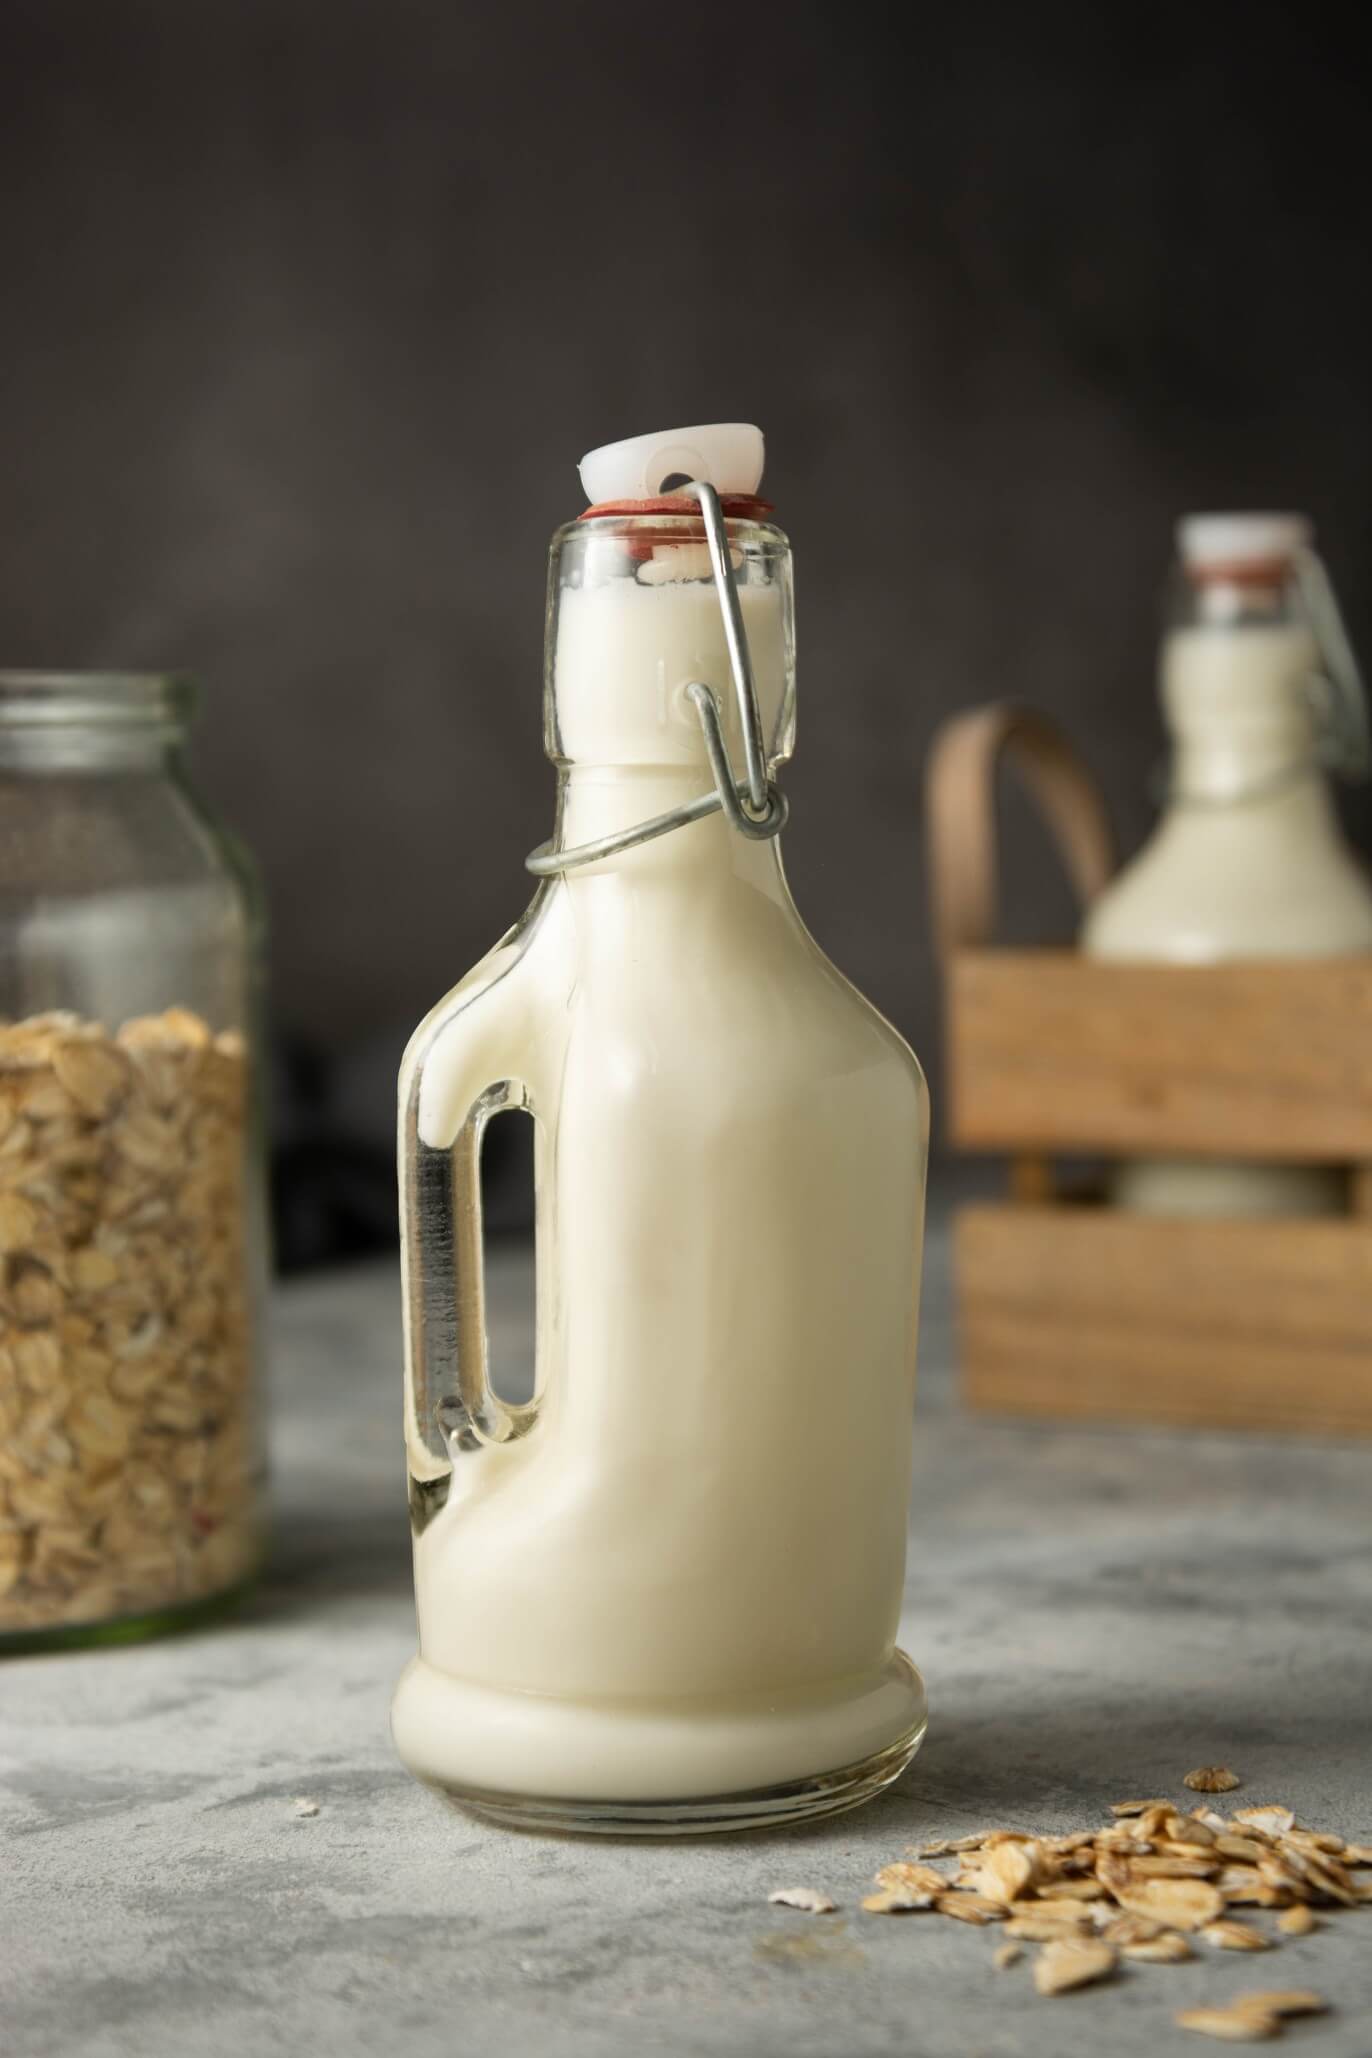 oat milk in glass bottle with rustic background